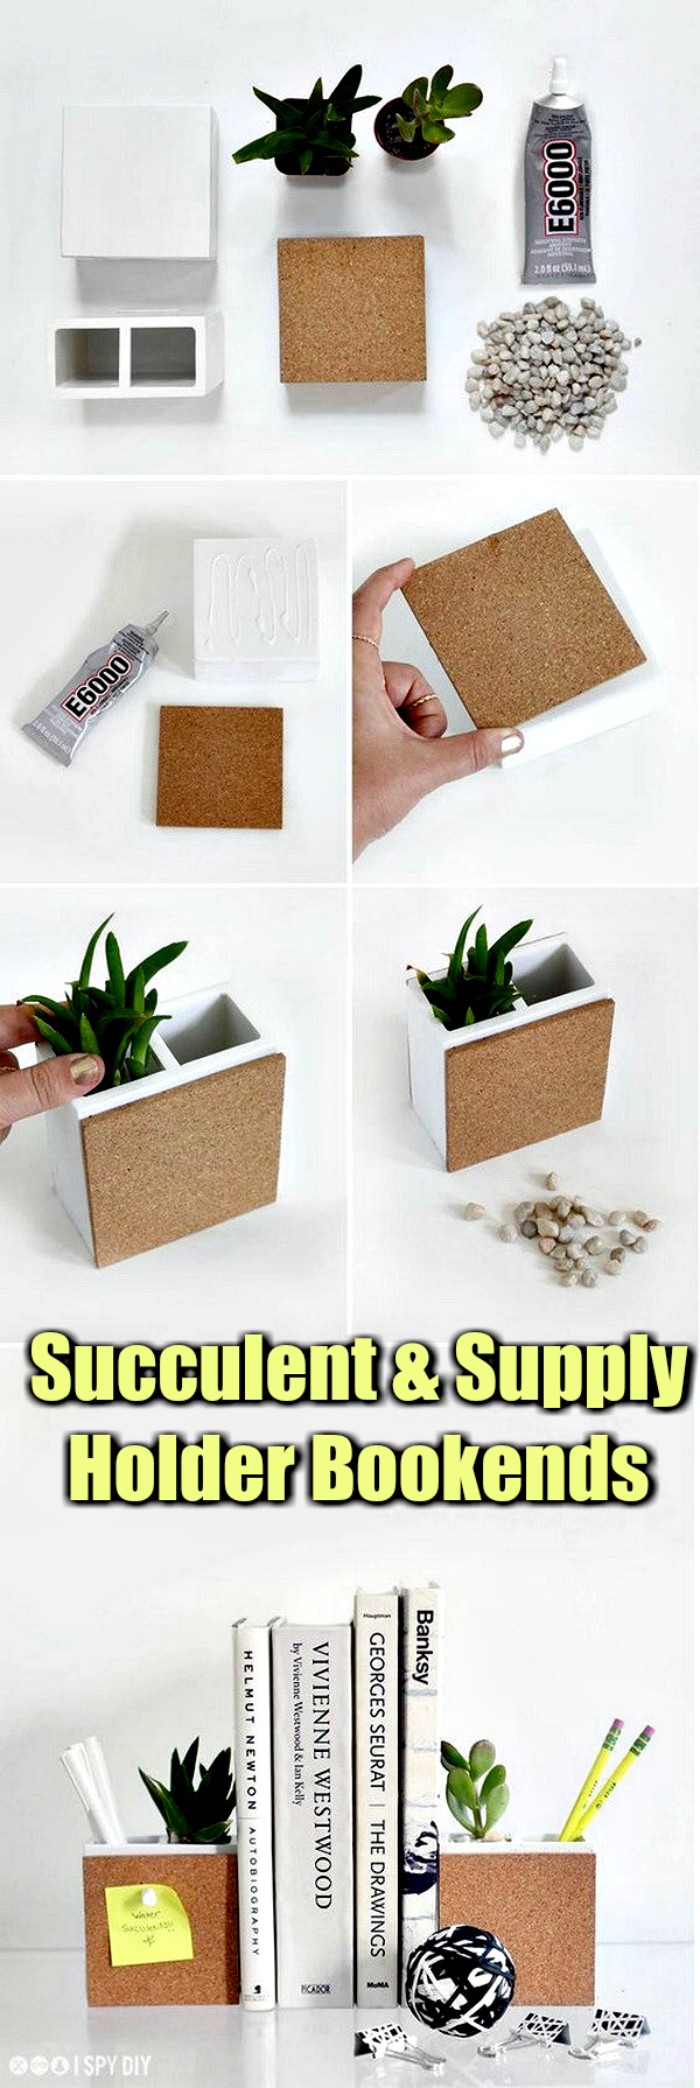 Succulent Supply Holder Bookends Cheap DIY Projects For Your Home Decoration